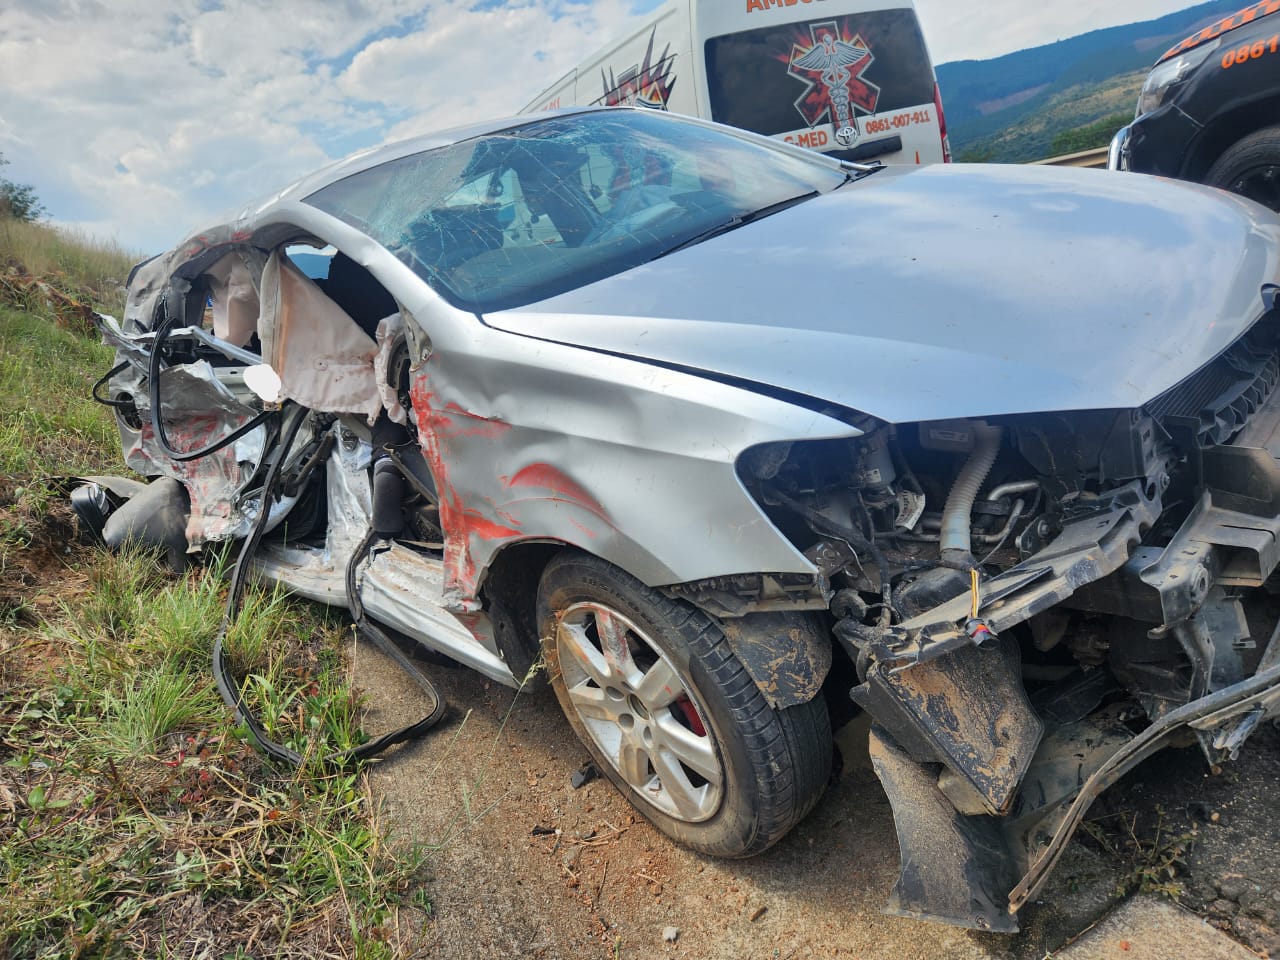 The Volkswagen Polo collided head-on with the bus and the driver of the Polo was killed.